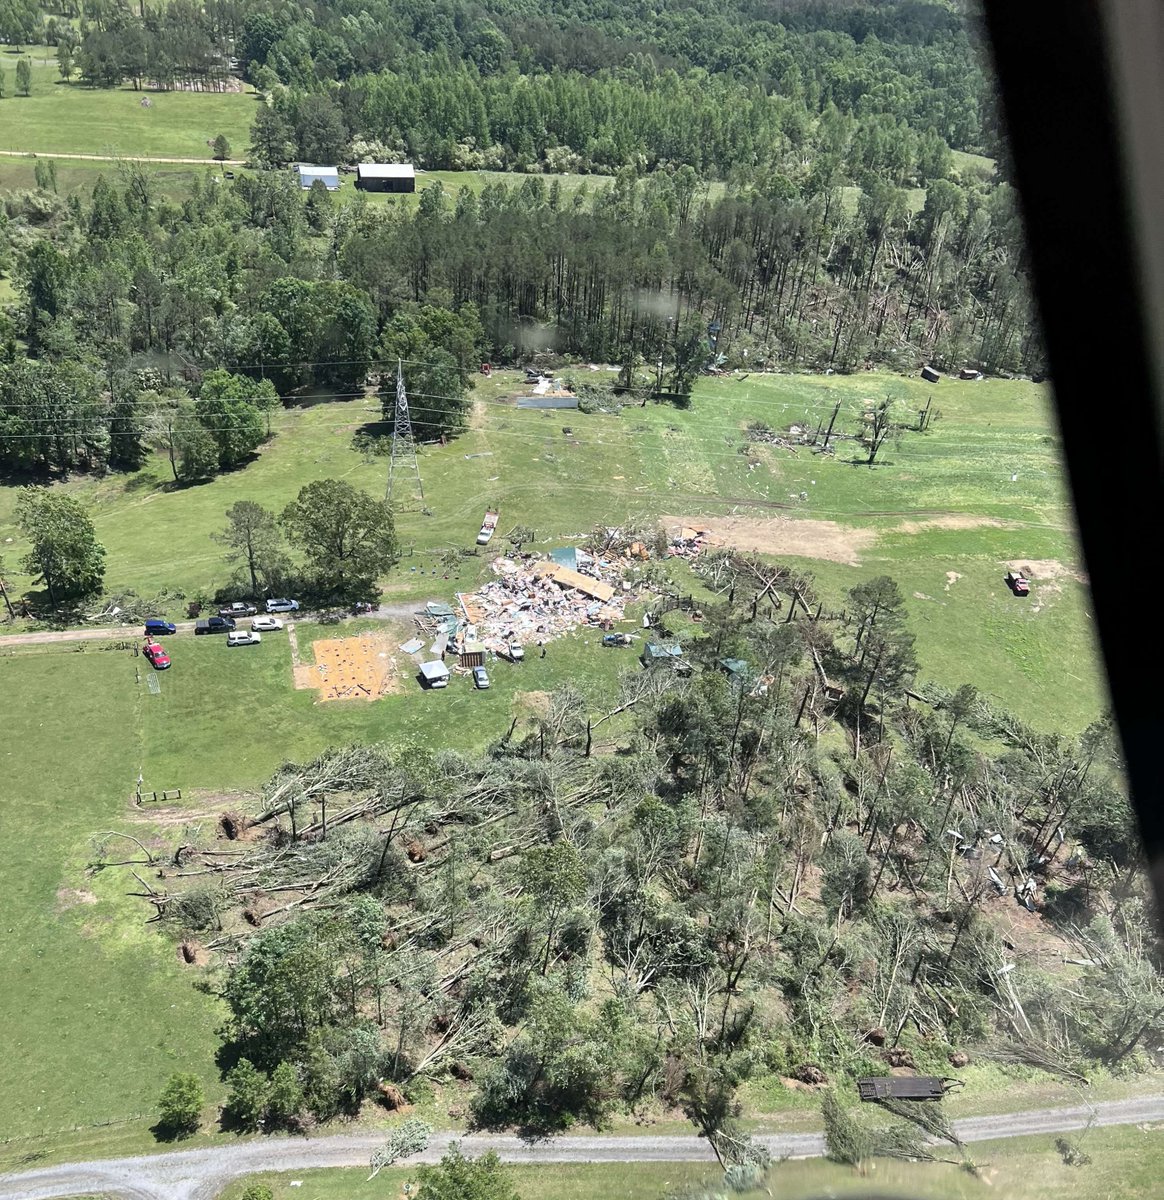 Our crews worked safely and quickly to restore service to back to Sand Mountain Electric Co-Op after severe weather damaged two transmission lines in Dekalb County. A @TVAnews helicopter captured this image in Henegar, AL. Our thoughts are with those impacted by the storms!